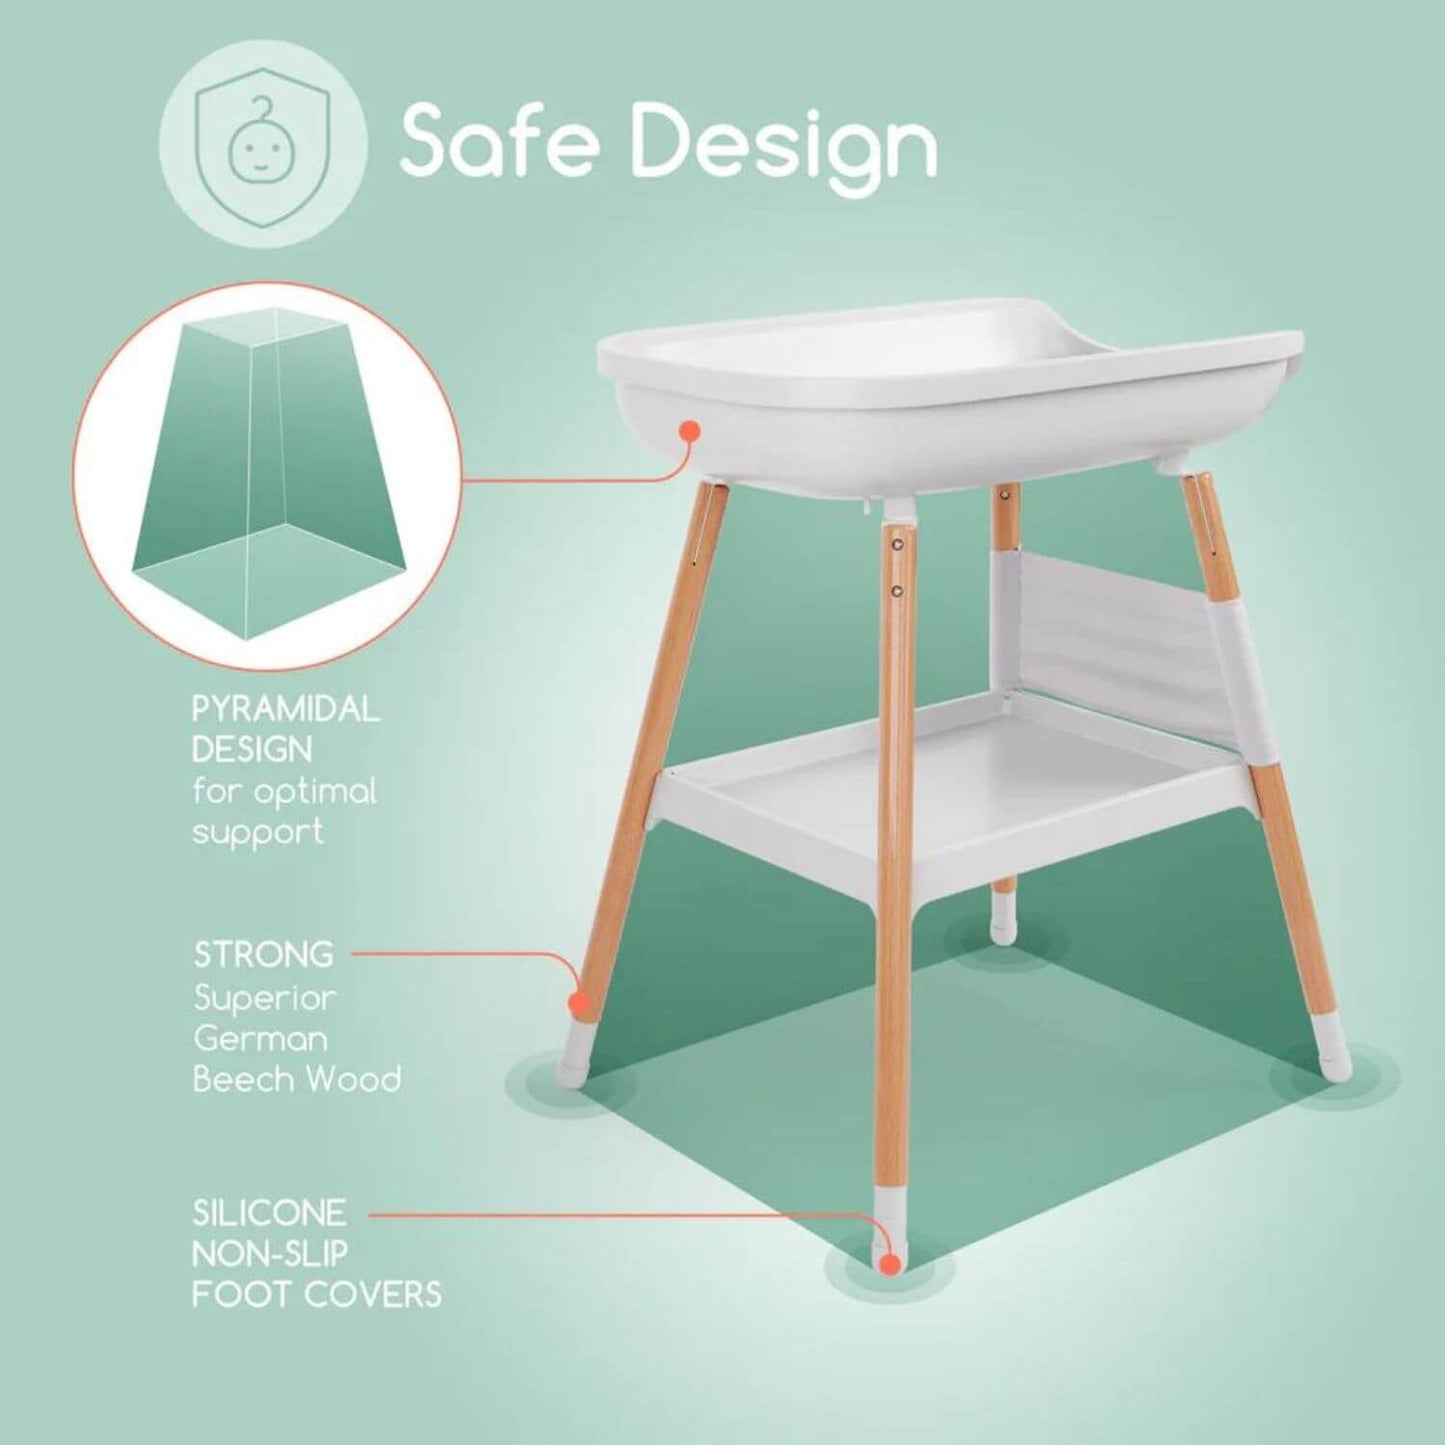 Children of Design Deluxe Diaper Changing Table - Detail